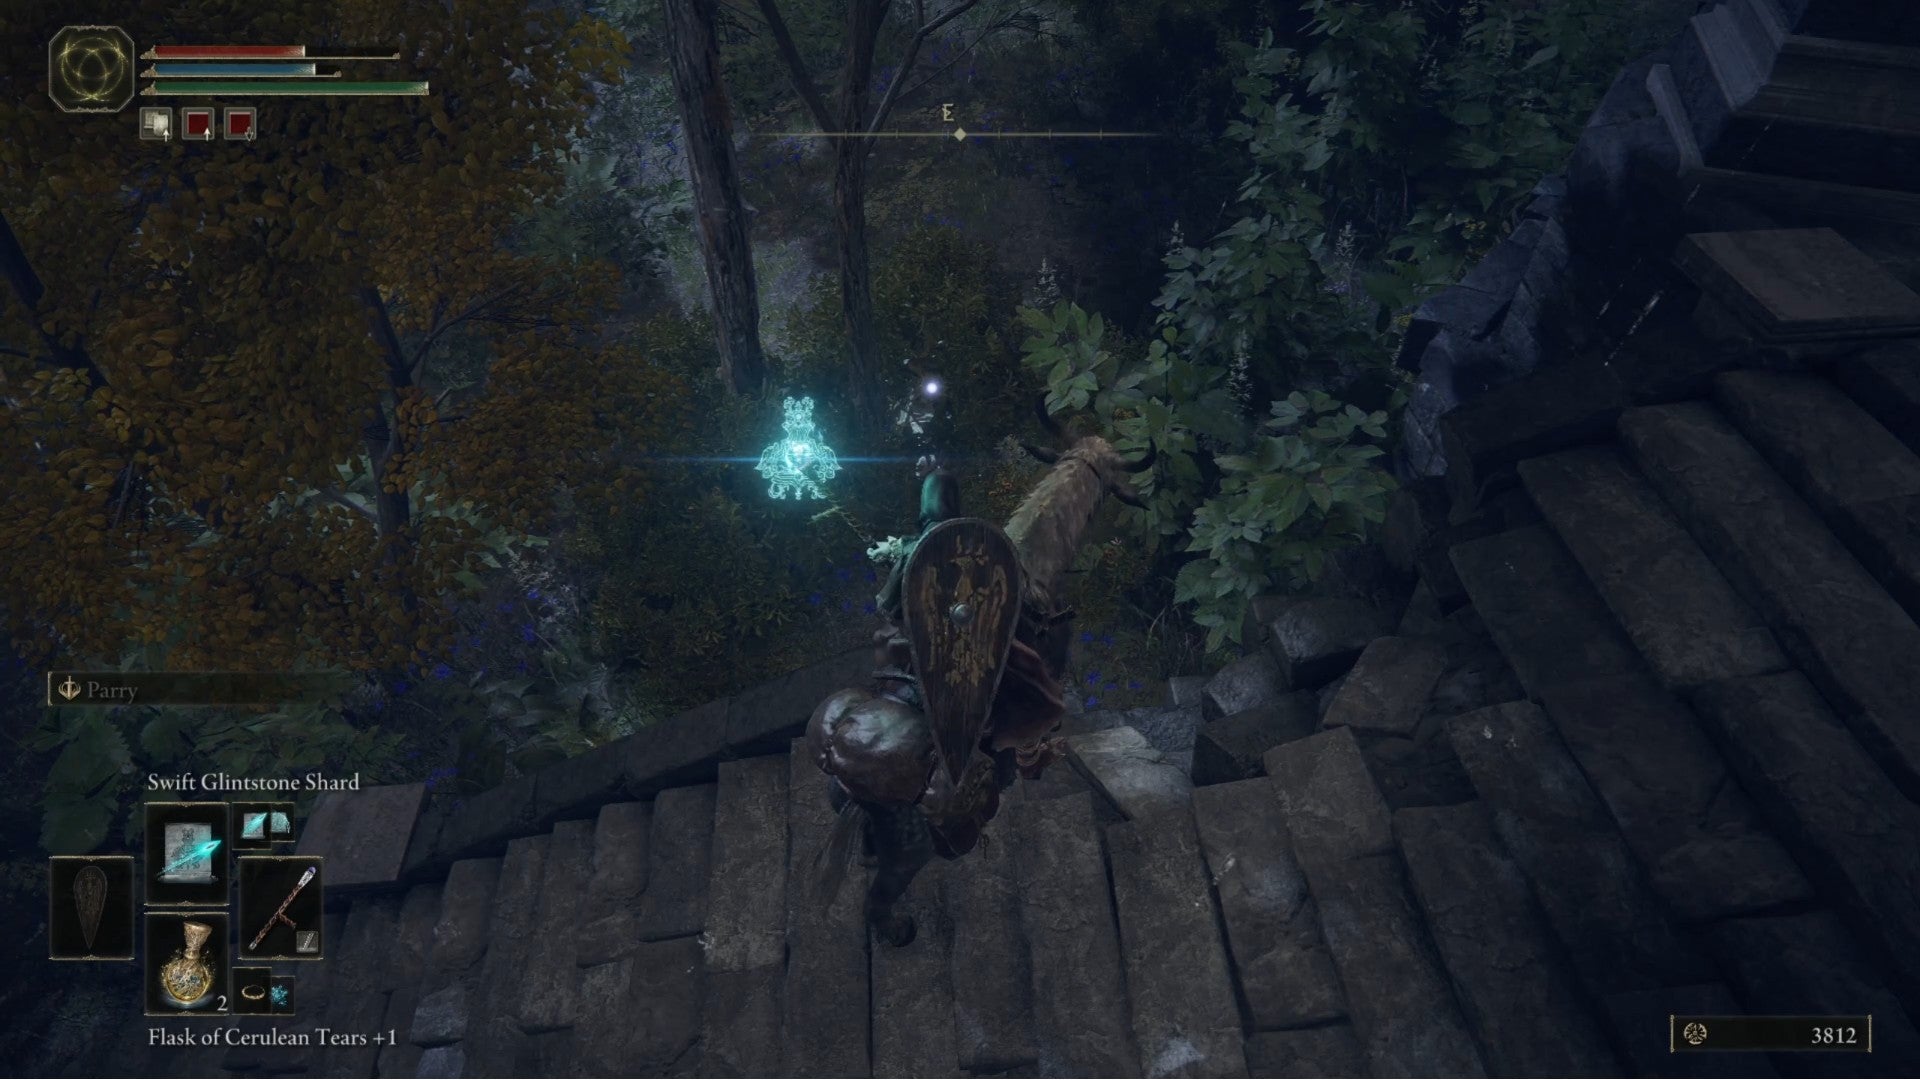 Elden Ring player aiming at a ghost turtle in a bush while on some stairs